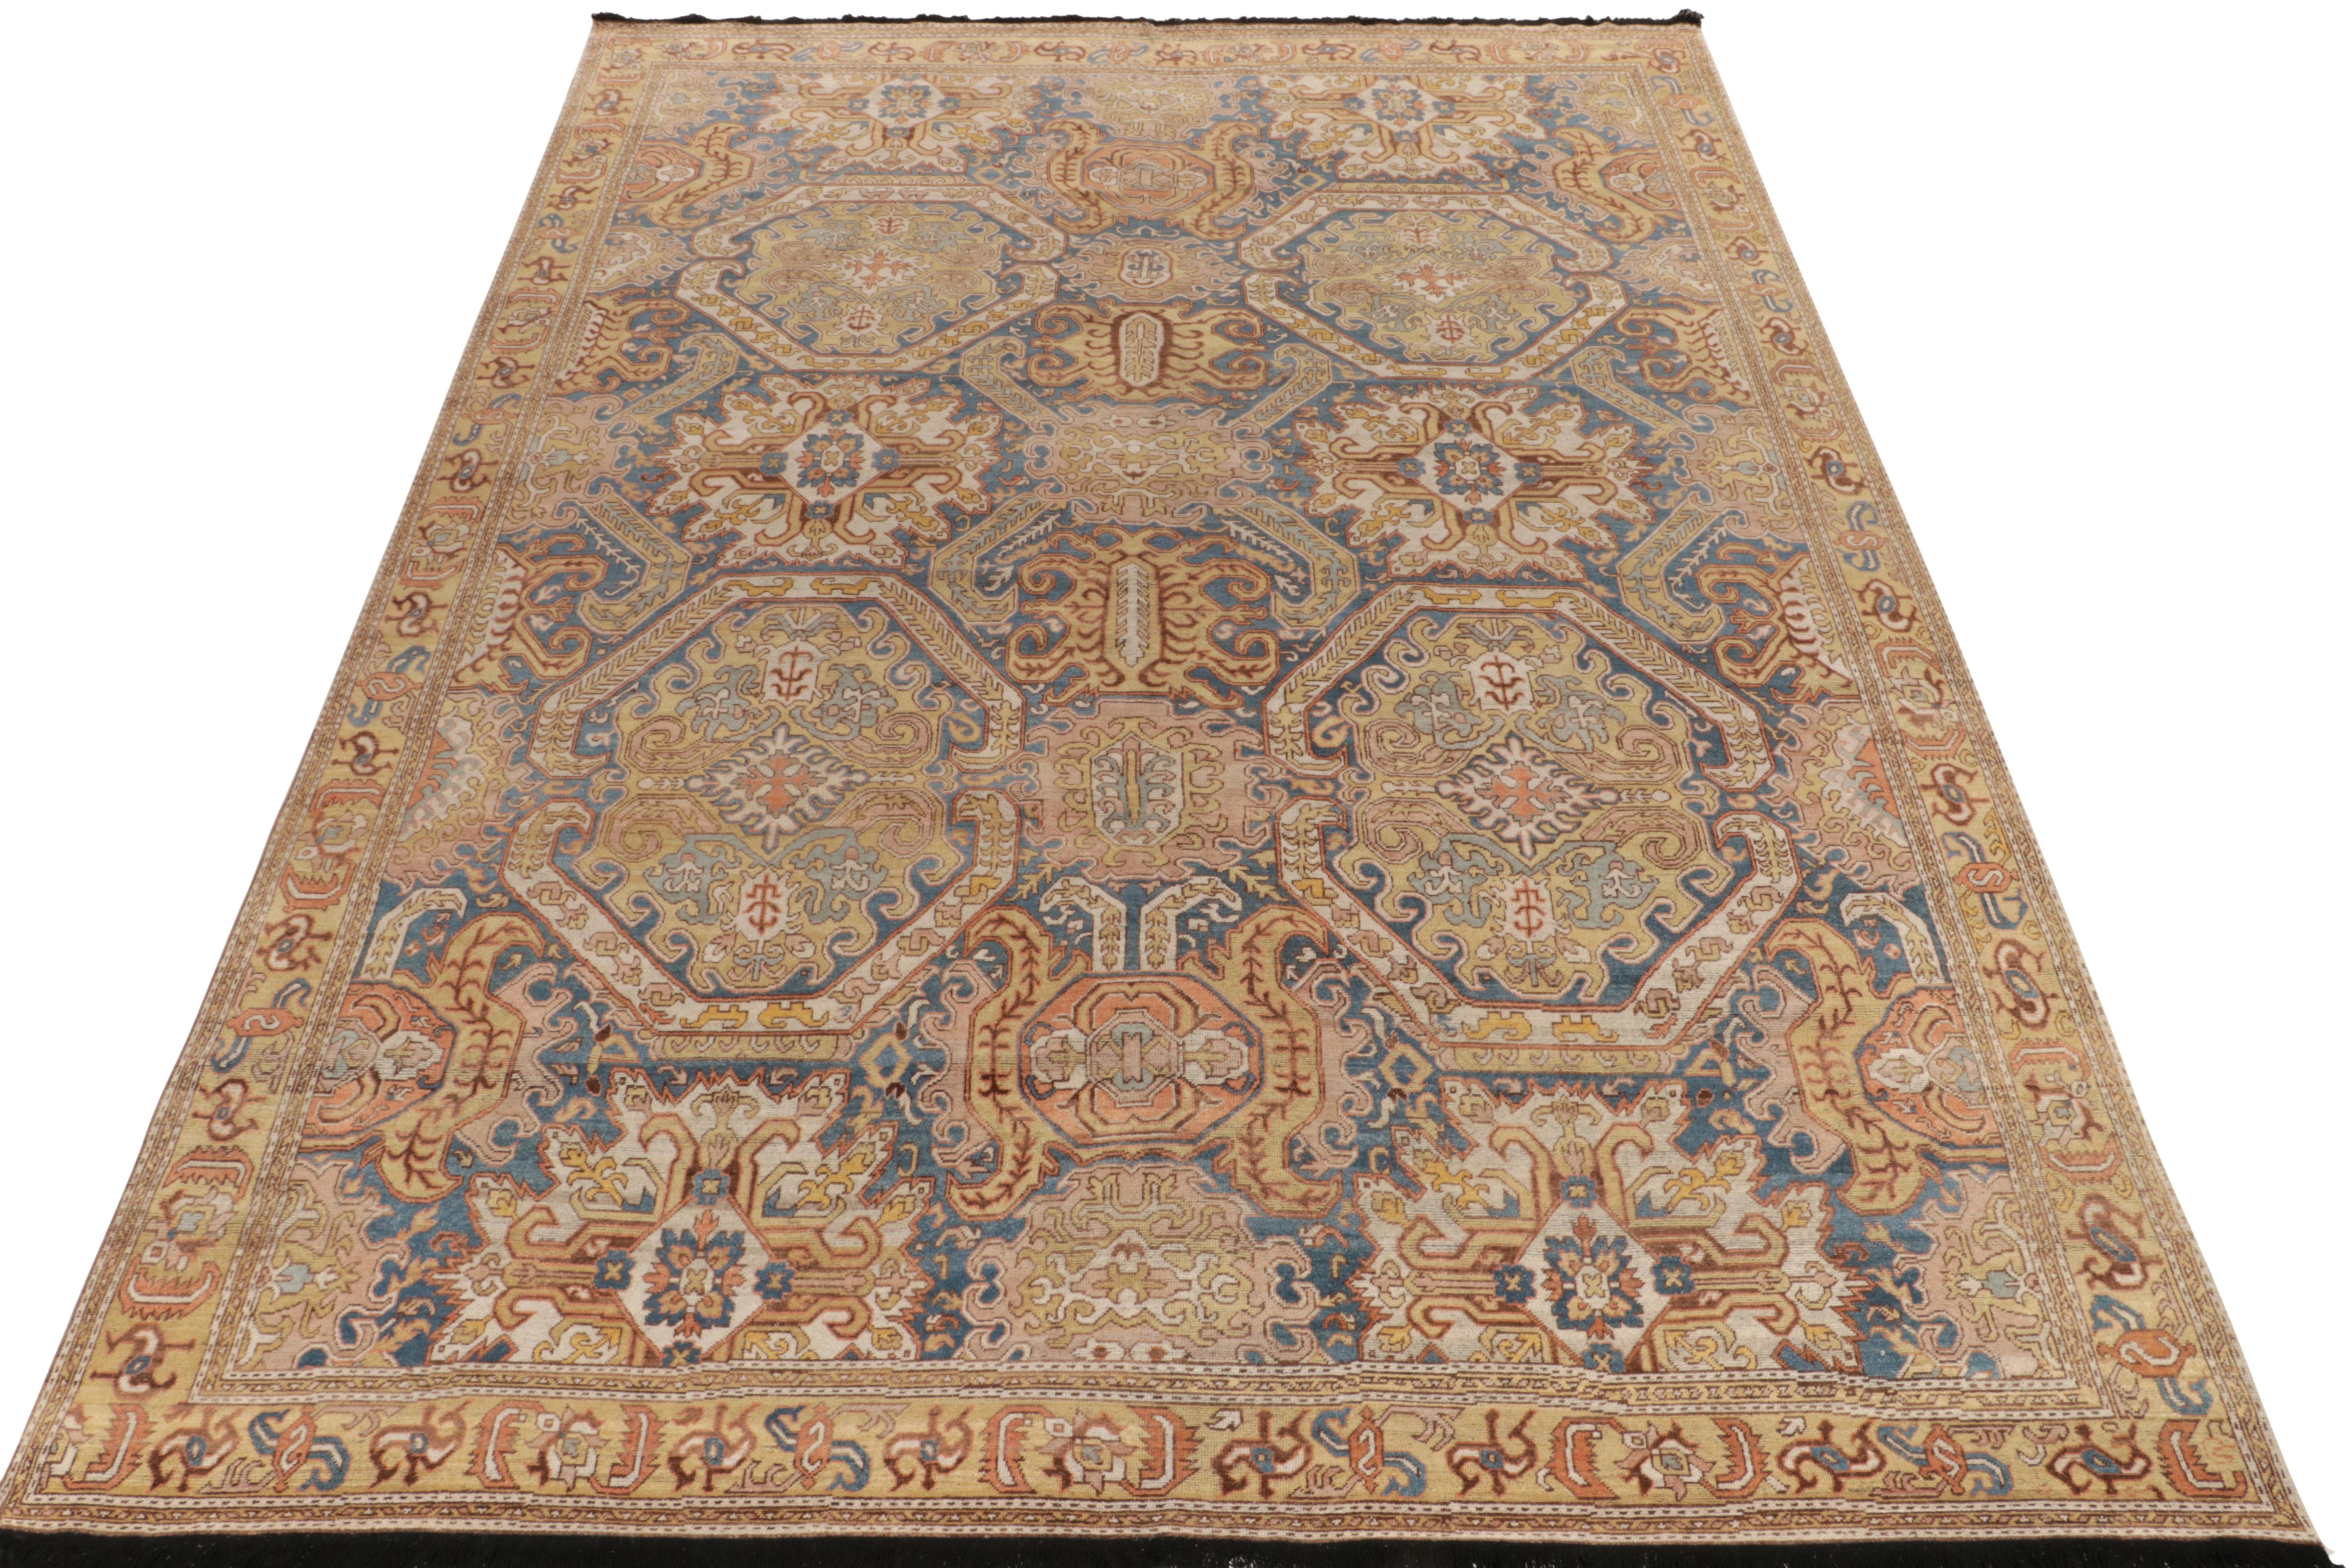 Belonging to our Burano collection, an 11 x 15 hand-knotted rug enjoying a beautiful primitivist attitude with unique colorway & graph. The tribal vision manifests with glorious geometric patterns in luxe blue, gold & white for a dramatic, rich